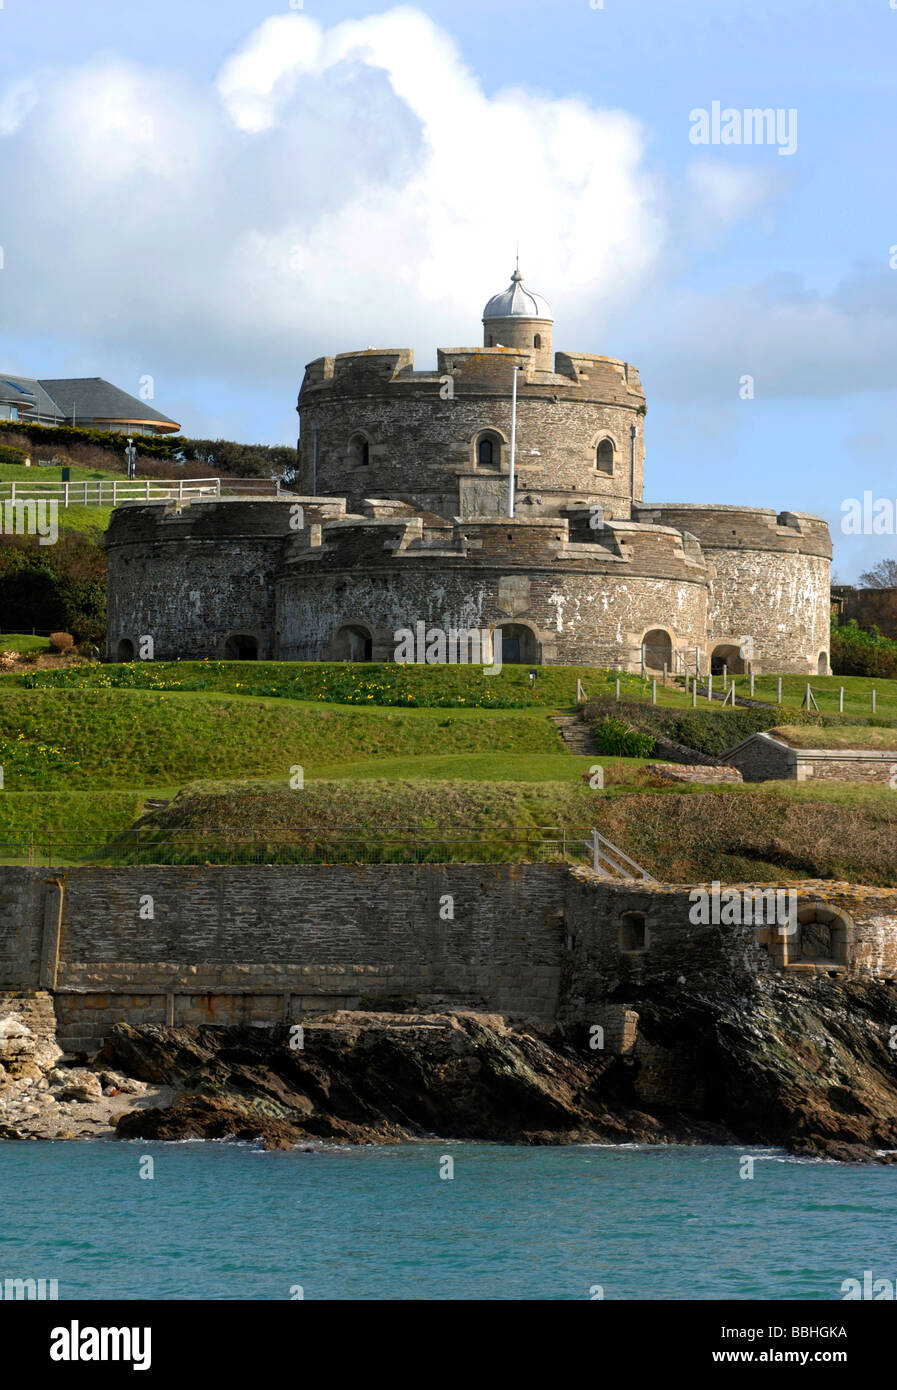 St Mawes Château, Cornwall, Angleterre, Royaume-Uni Banque D'Images